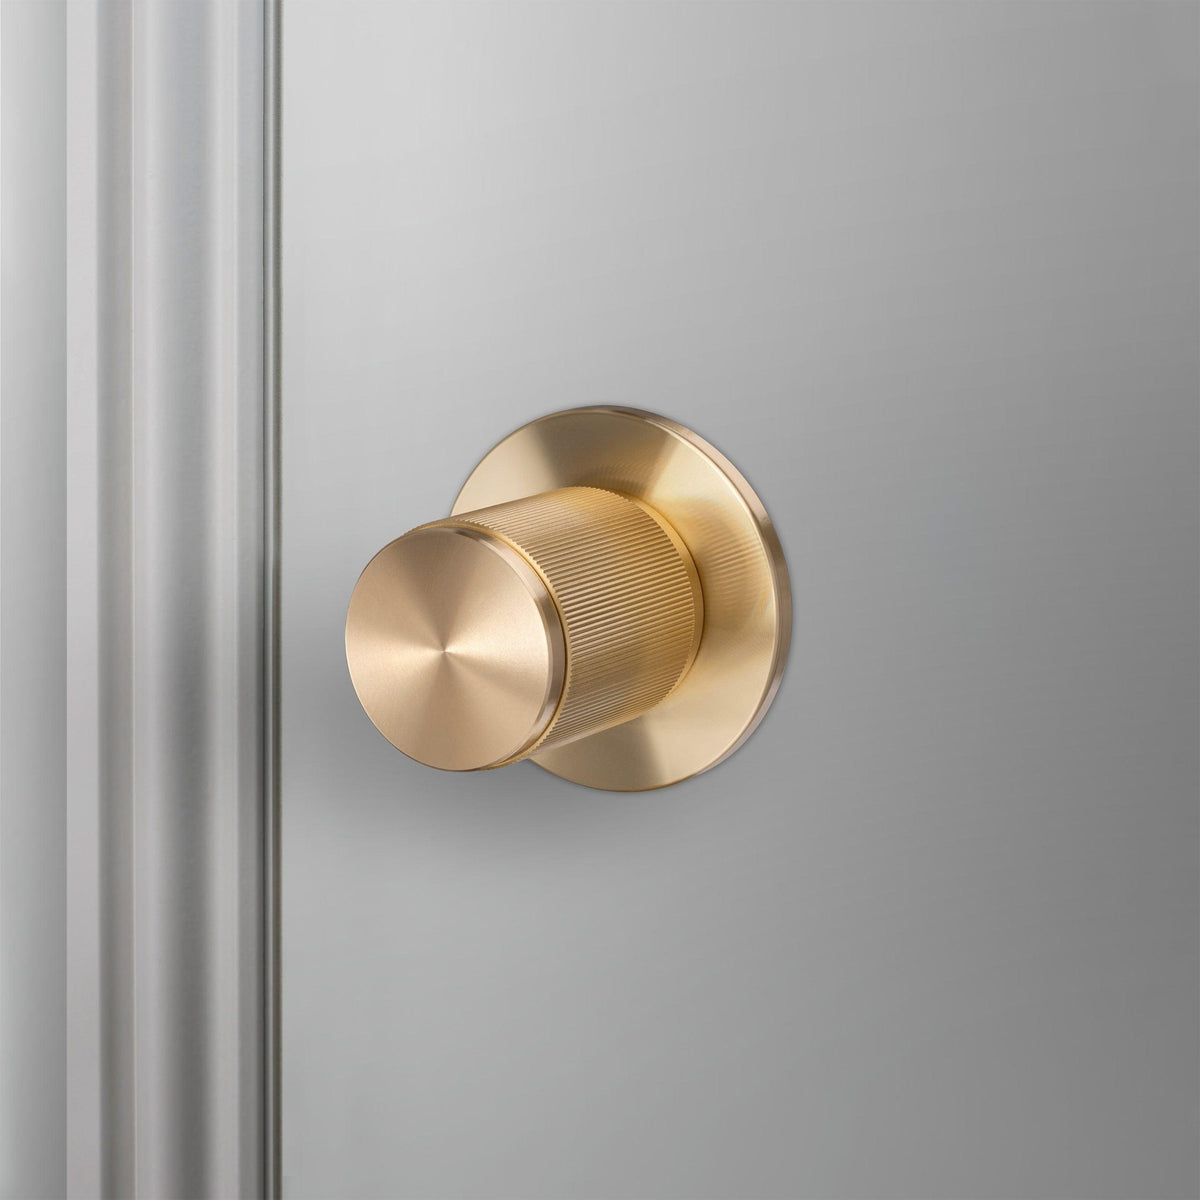 Buster + Punch - Pre-Drilled Door Knob - Linear - NDK-051065 | Montreal Lighting & Hardware